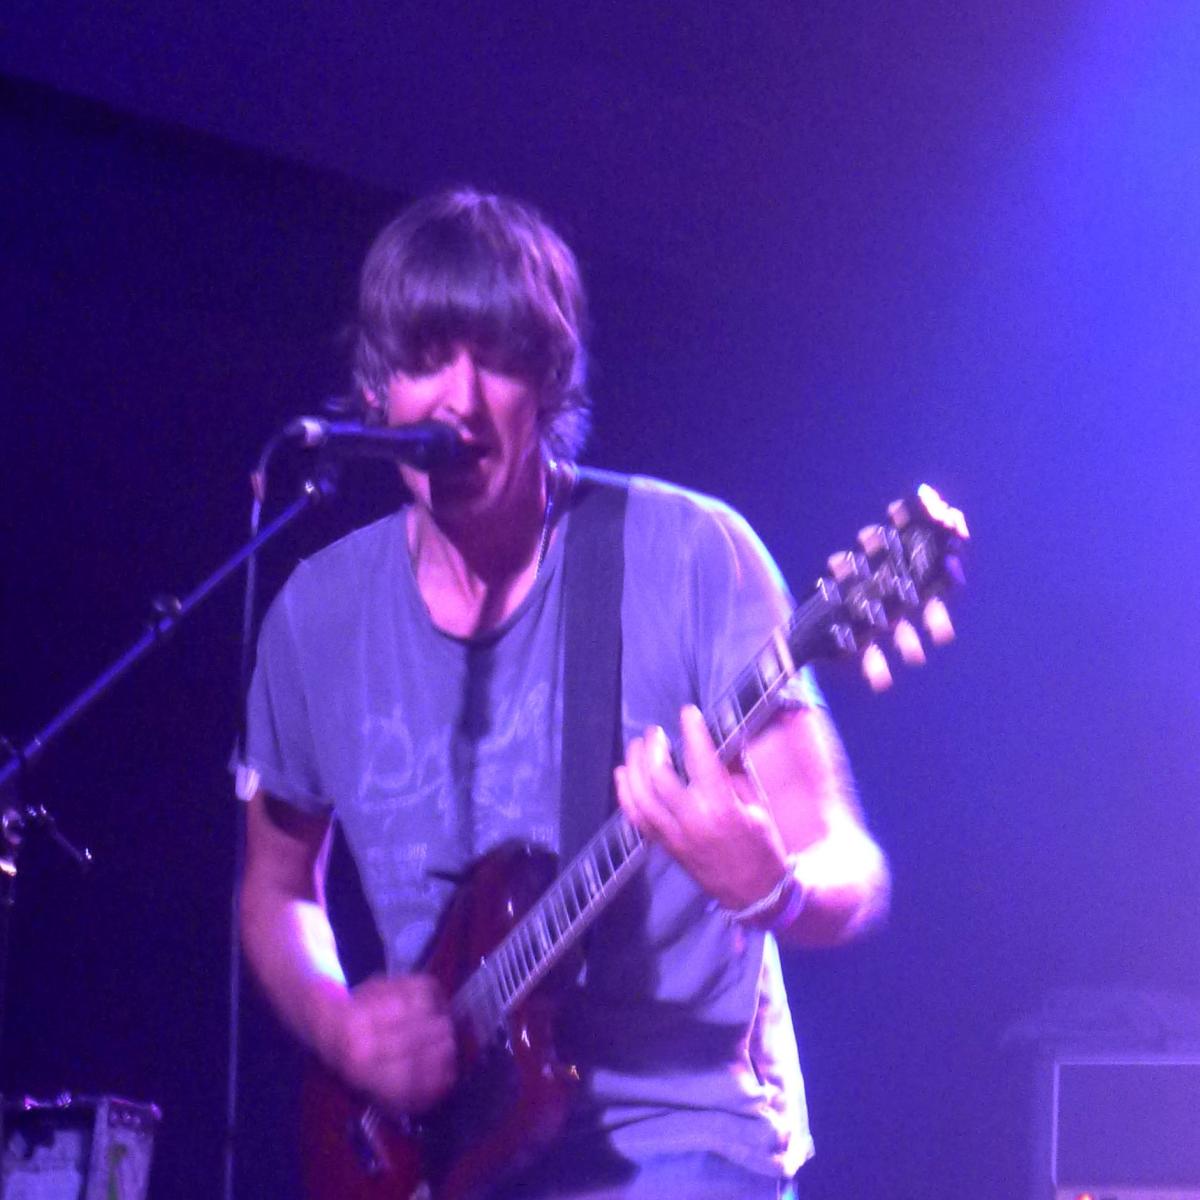 Stephen Malkmus and the Jicks @ Rescue Rooms, 28th August 2014